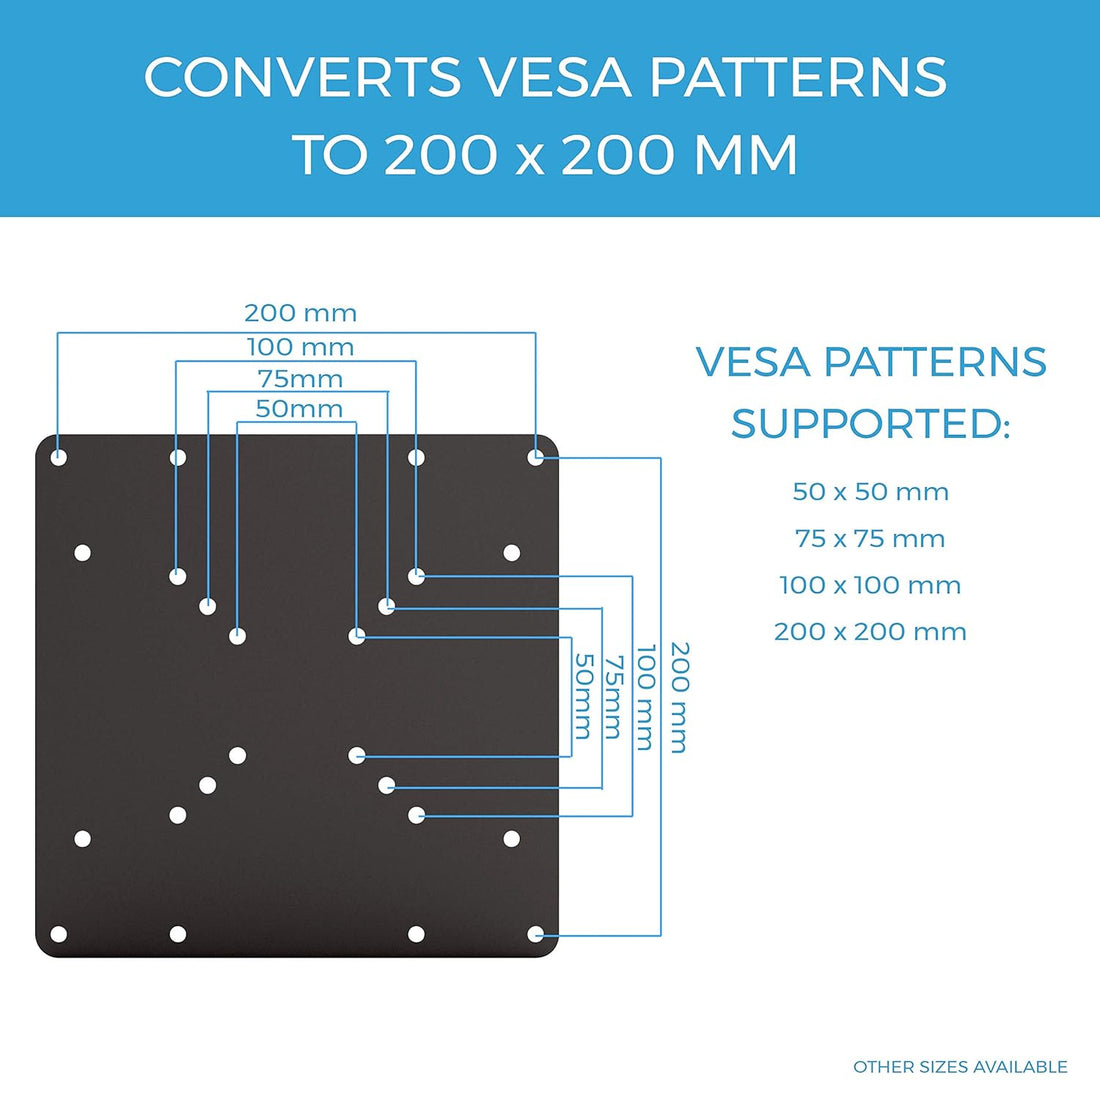 HumanCentric VESA Mount Adapter Plate for TV Mounts | Convert 75 x 75 and 100 x 100 to 200 x 200 mm VESA Patterns | Includes Hardware Kit